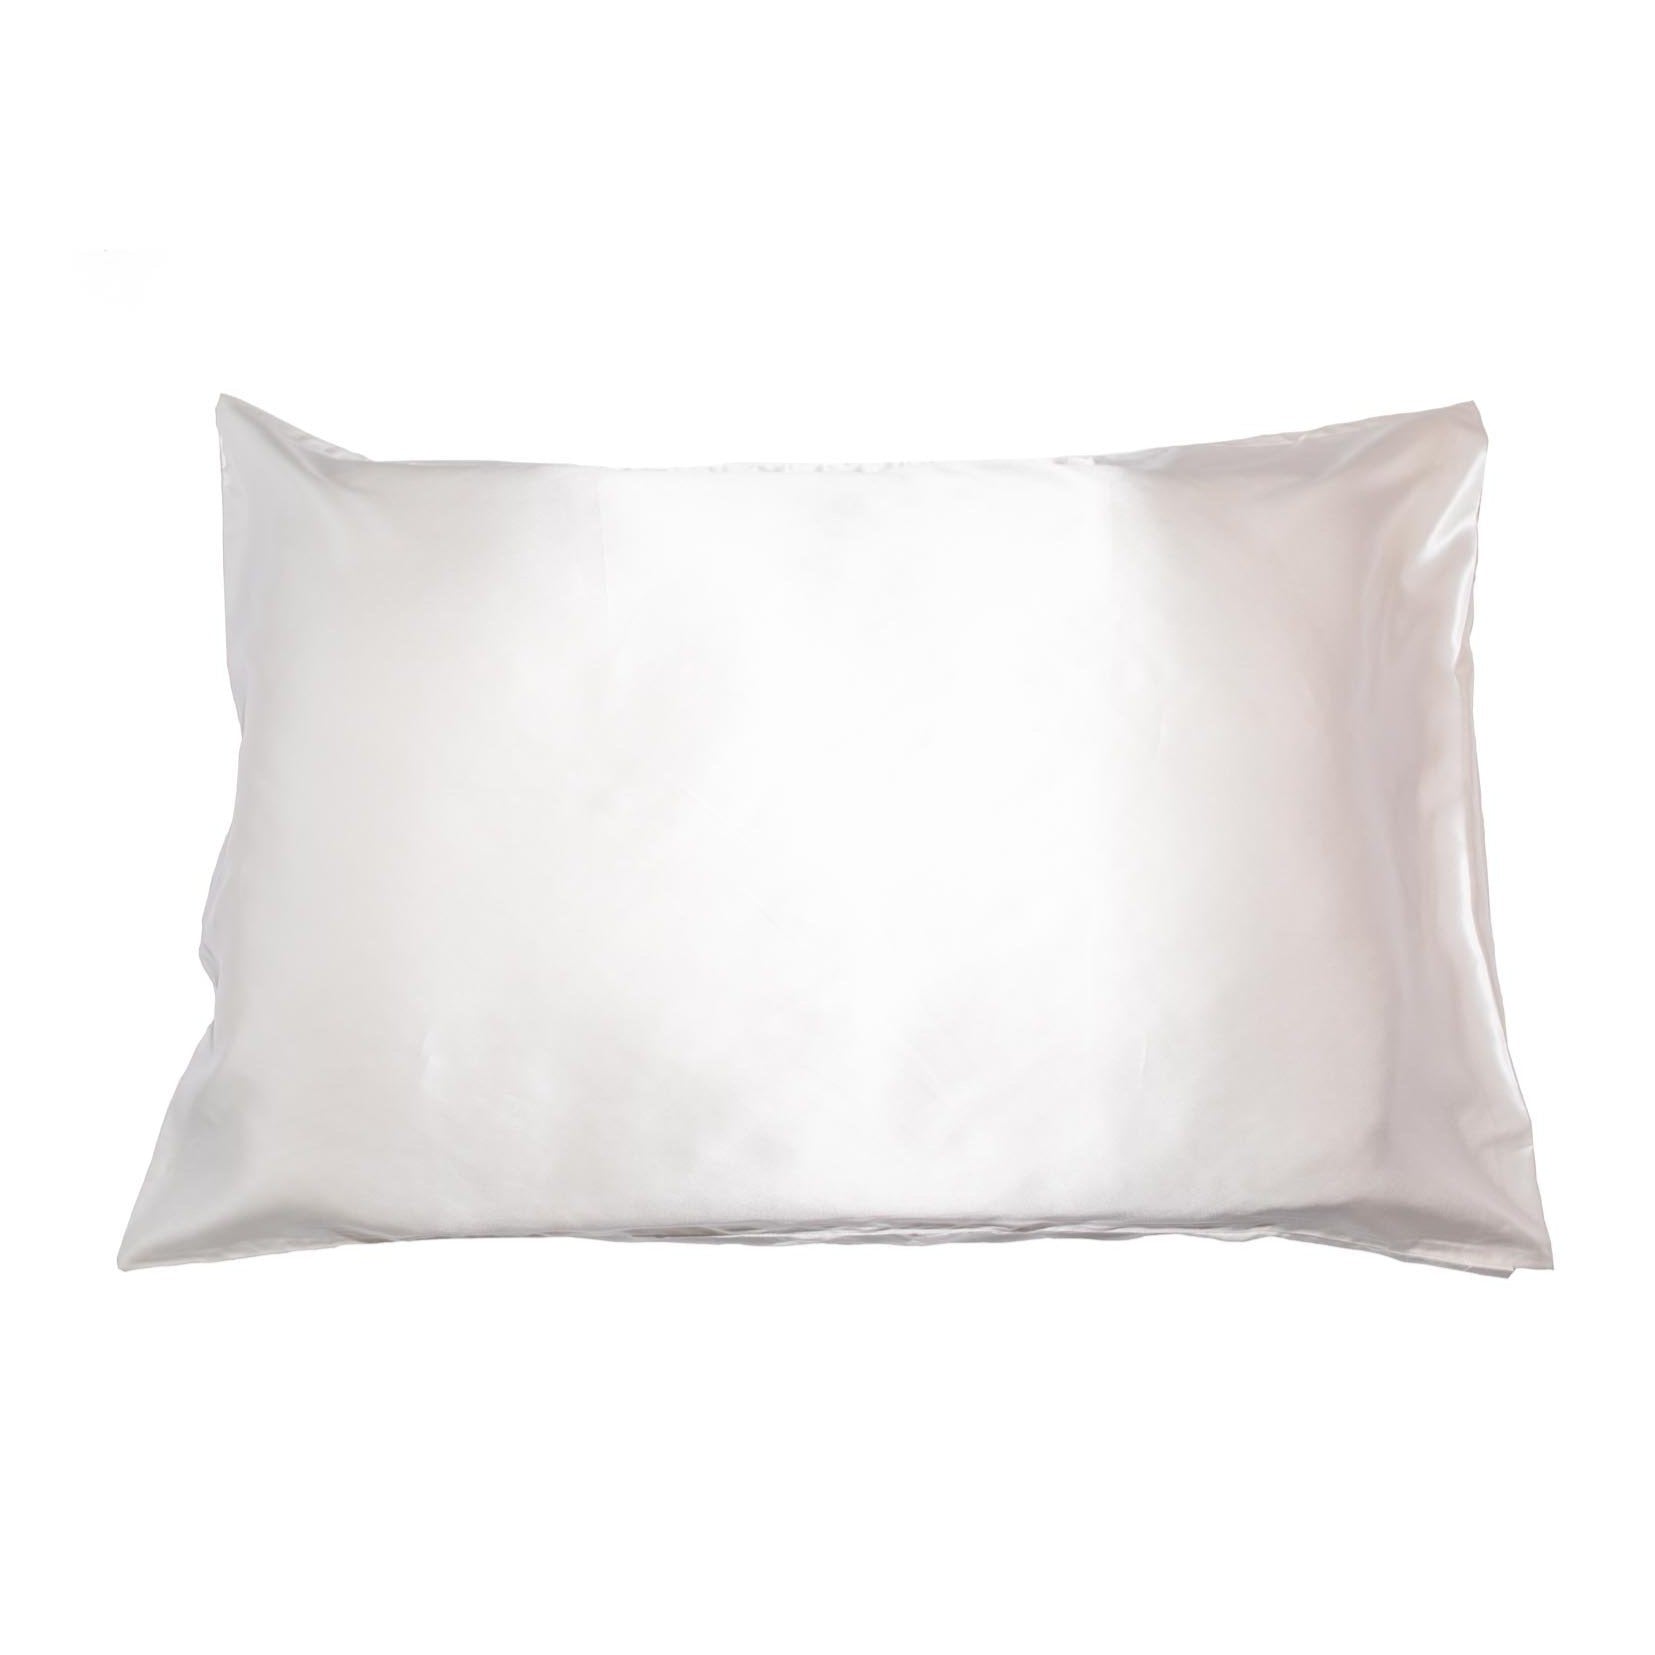 Zove Beauty High Quality Silk Pillowcase Authentic Genuine